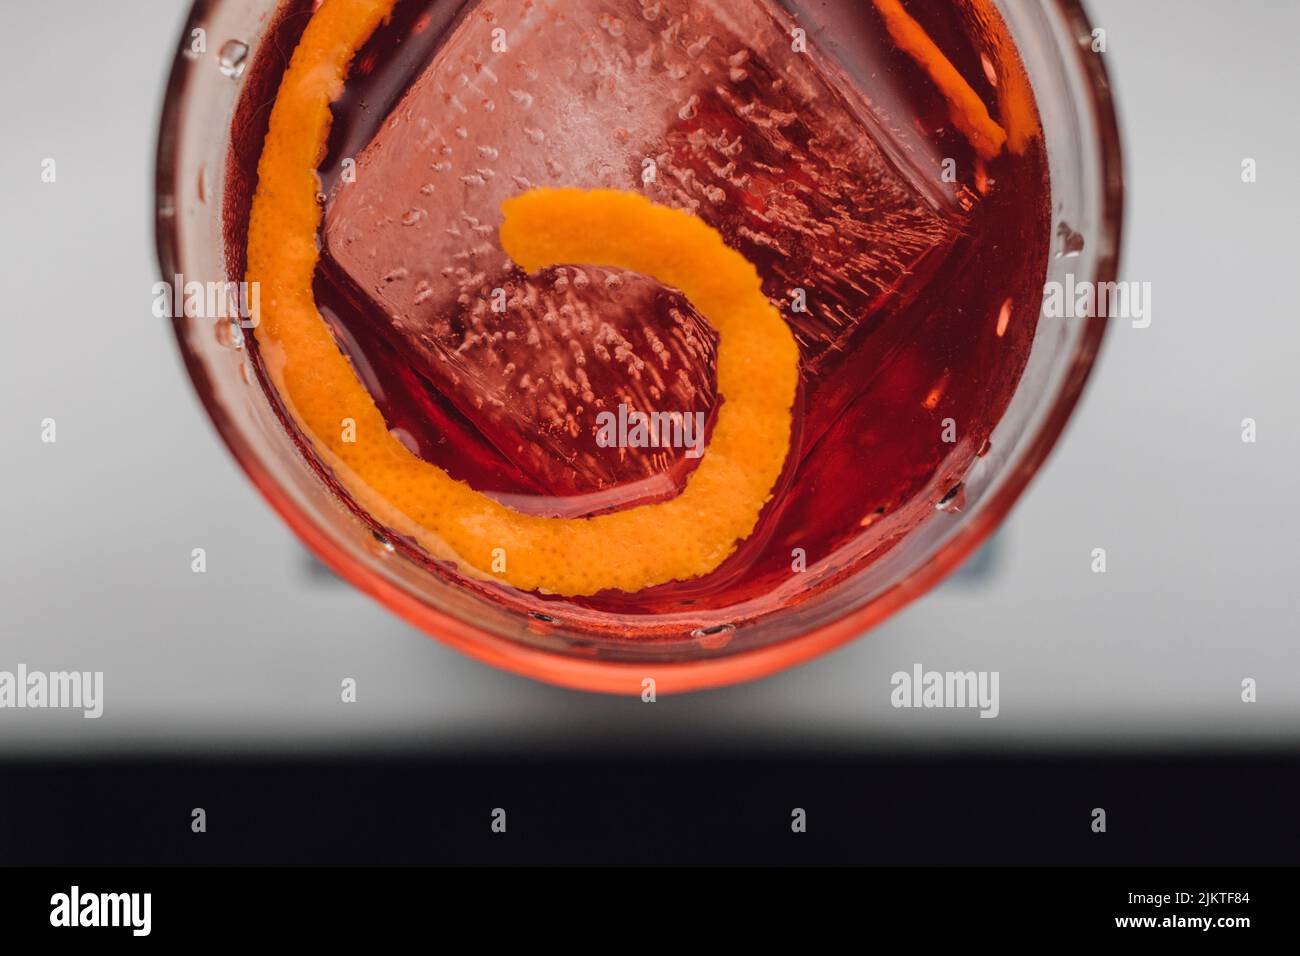 putting the G in Negroni, a cocktail with Campari, Gin, vermouth on ice with orange twist garnish Stock Photo